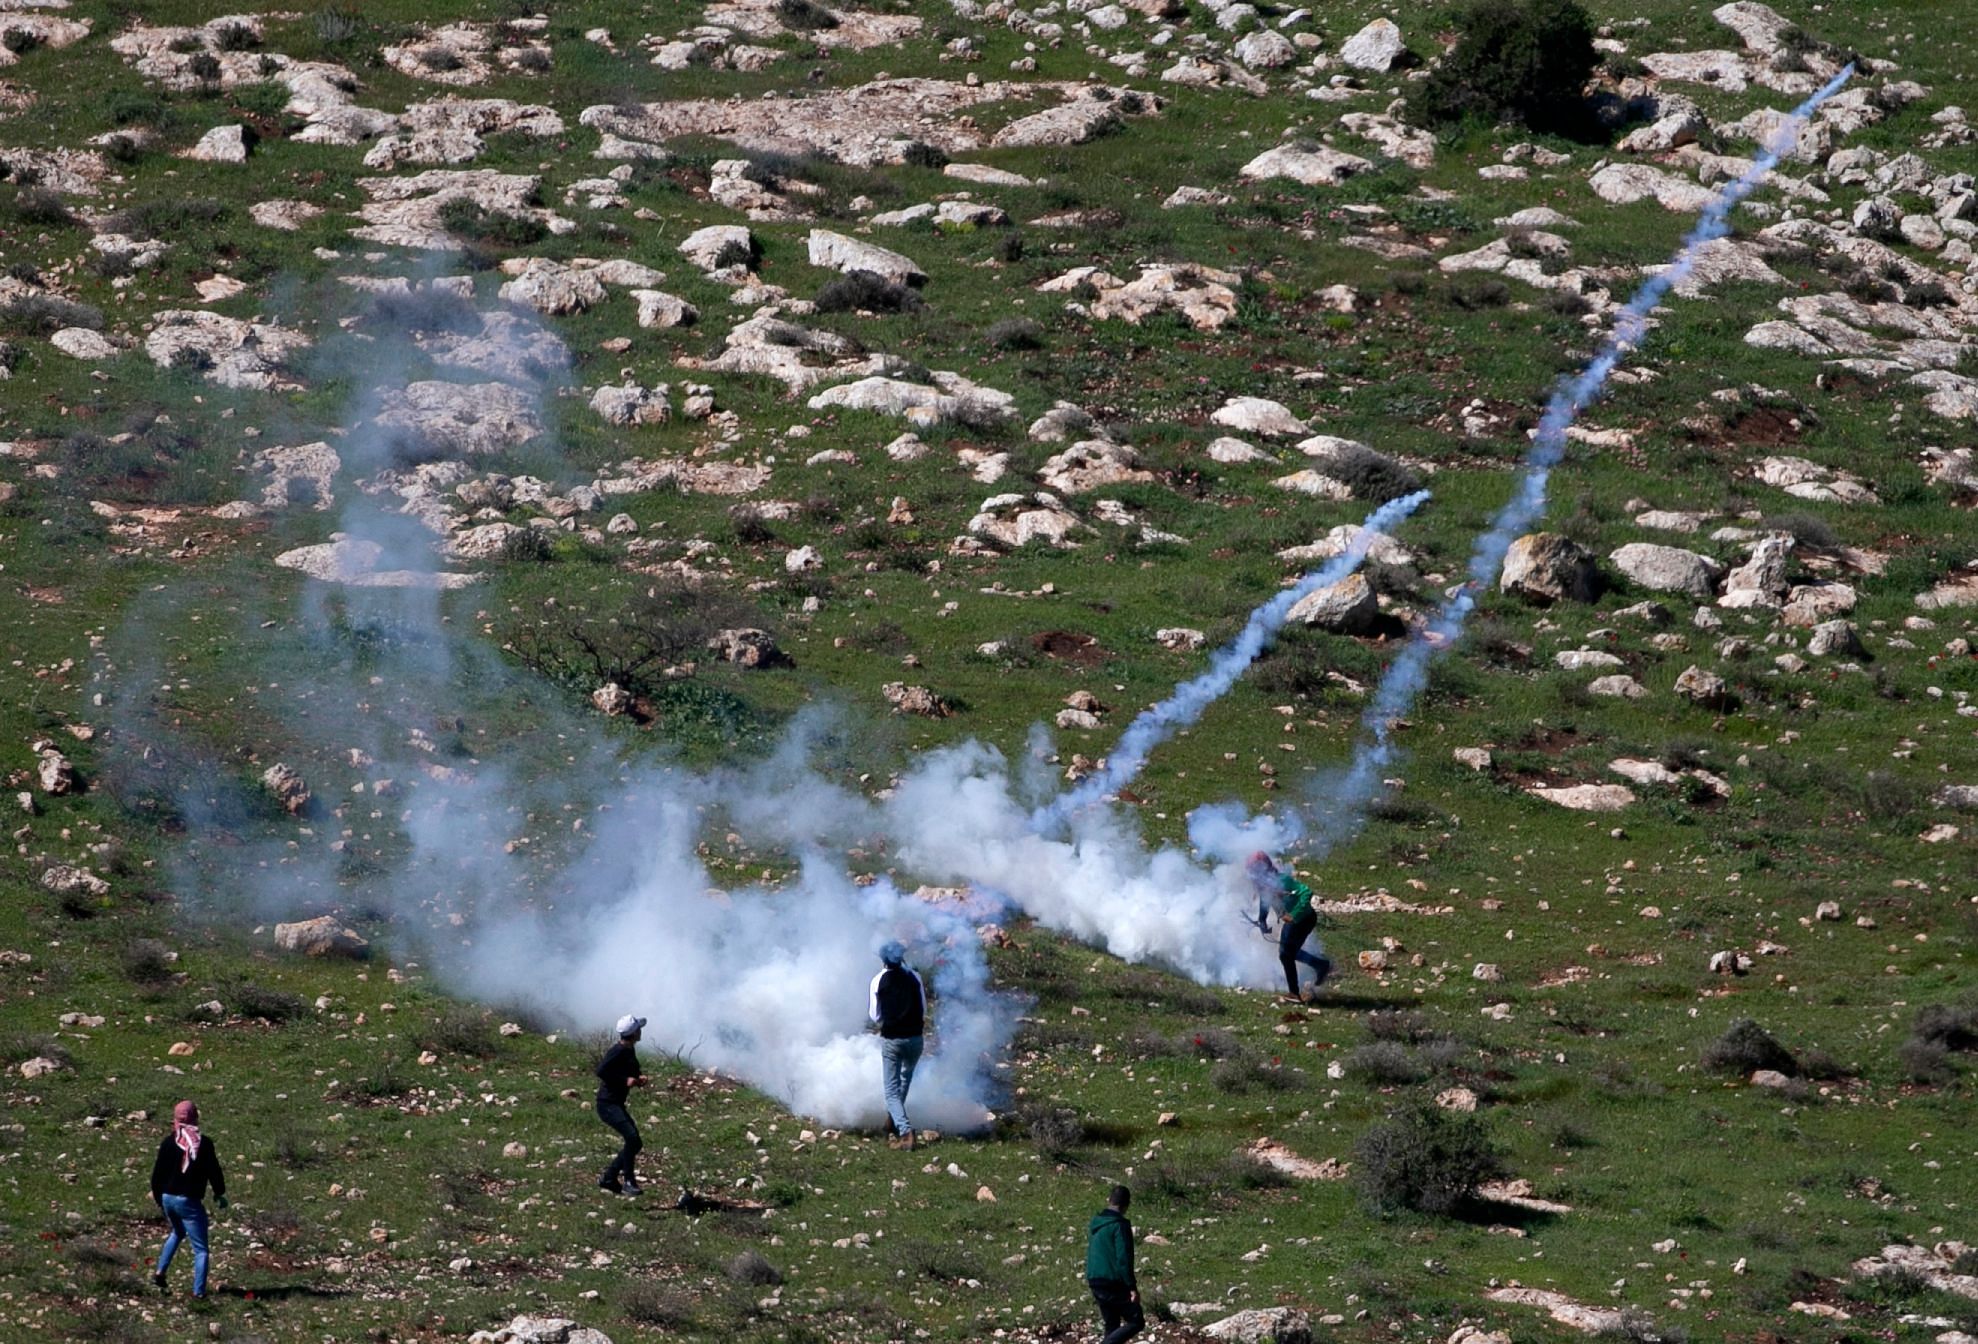 Children from the village of Beit Dajan, east of Nablus, hurl rocks at Israeli soldiers during a protest against the establishment of a settlement outpost on the lands of the village, on February 26, 2021. Credit: AFP Photo